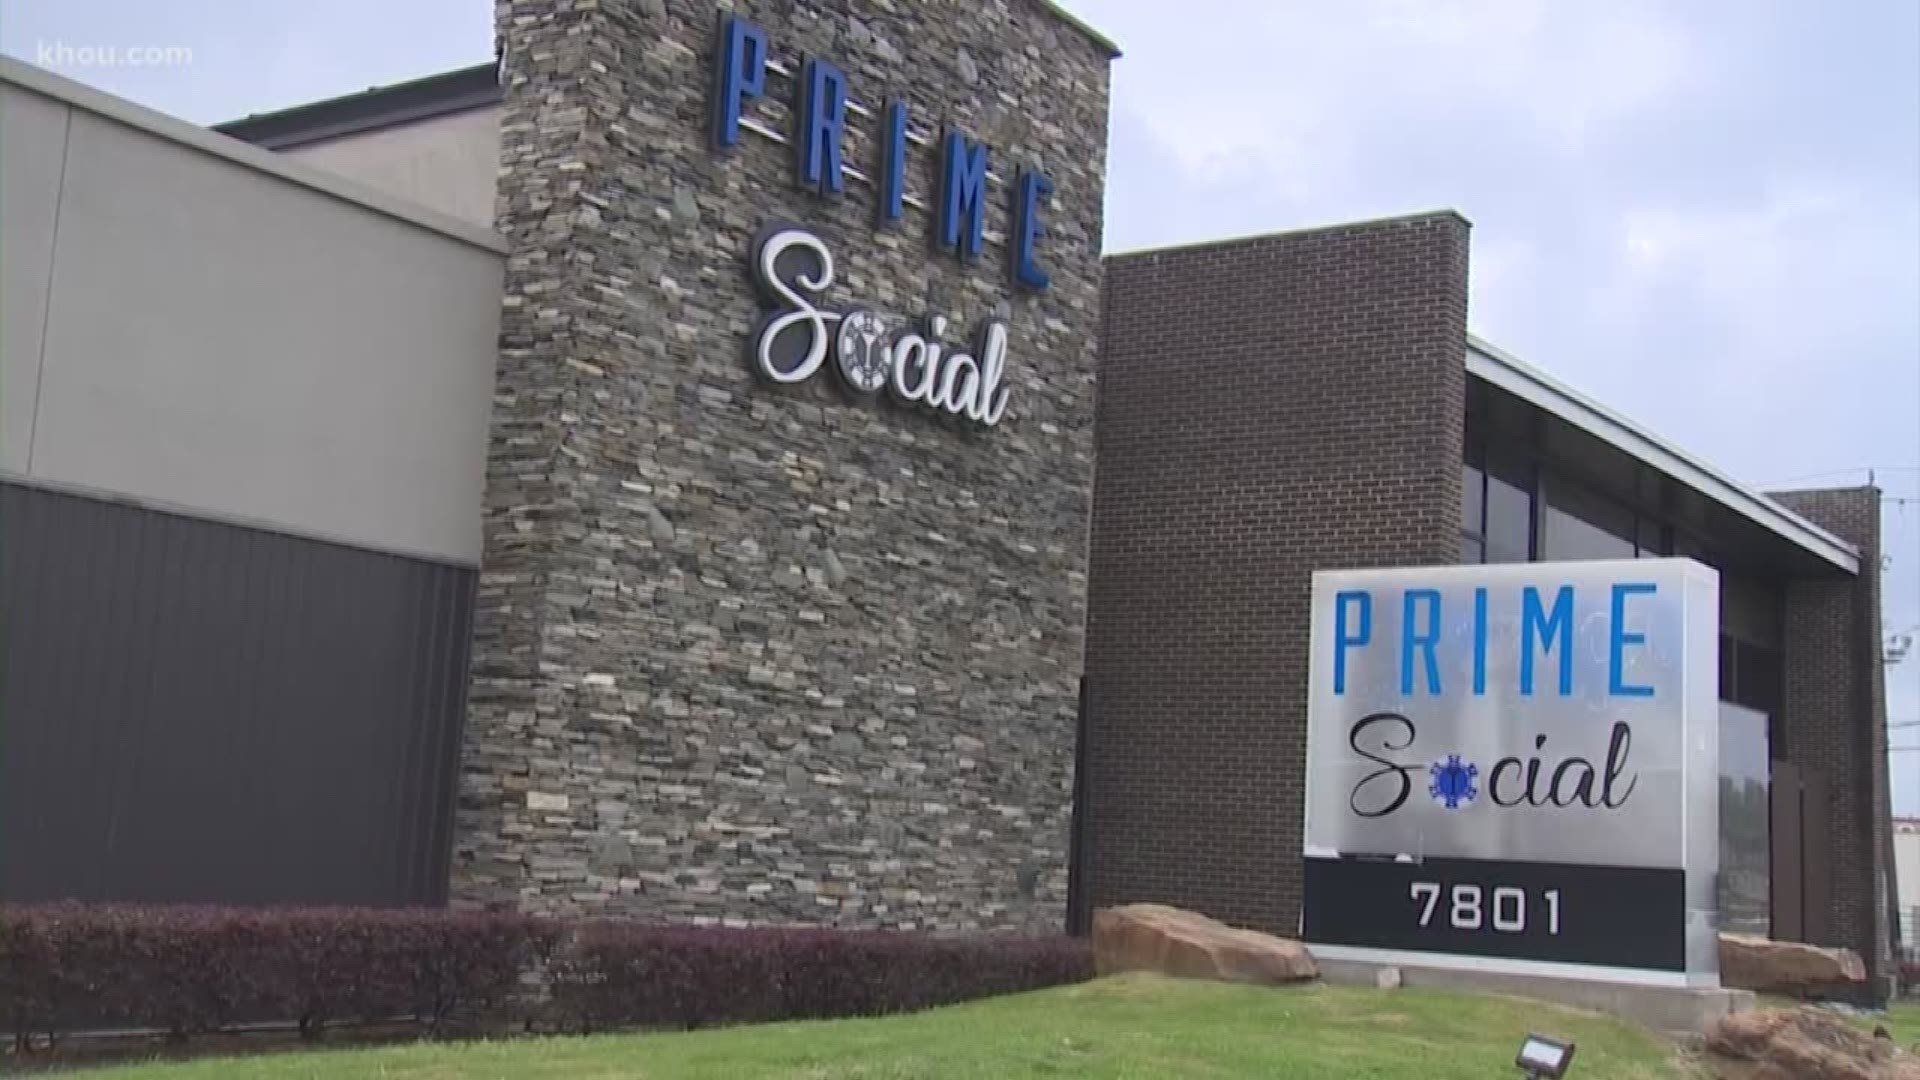 A local poker club is ready to get back to business after the district attorney's office dropped money laundering charges. Since it opened in January 2018, Prime Social was the fastest growing private poker club in the country. So a club spokesman says you can imagine the owners were blindsided when it got raided on May 1.